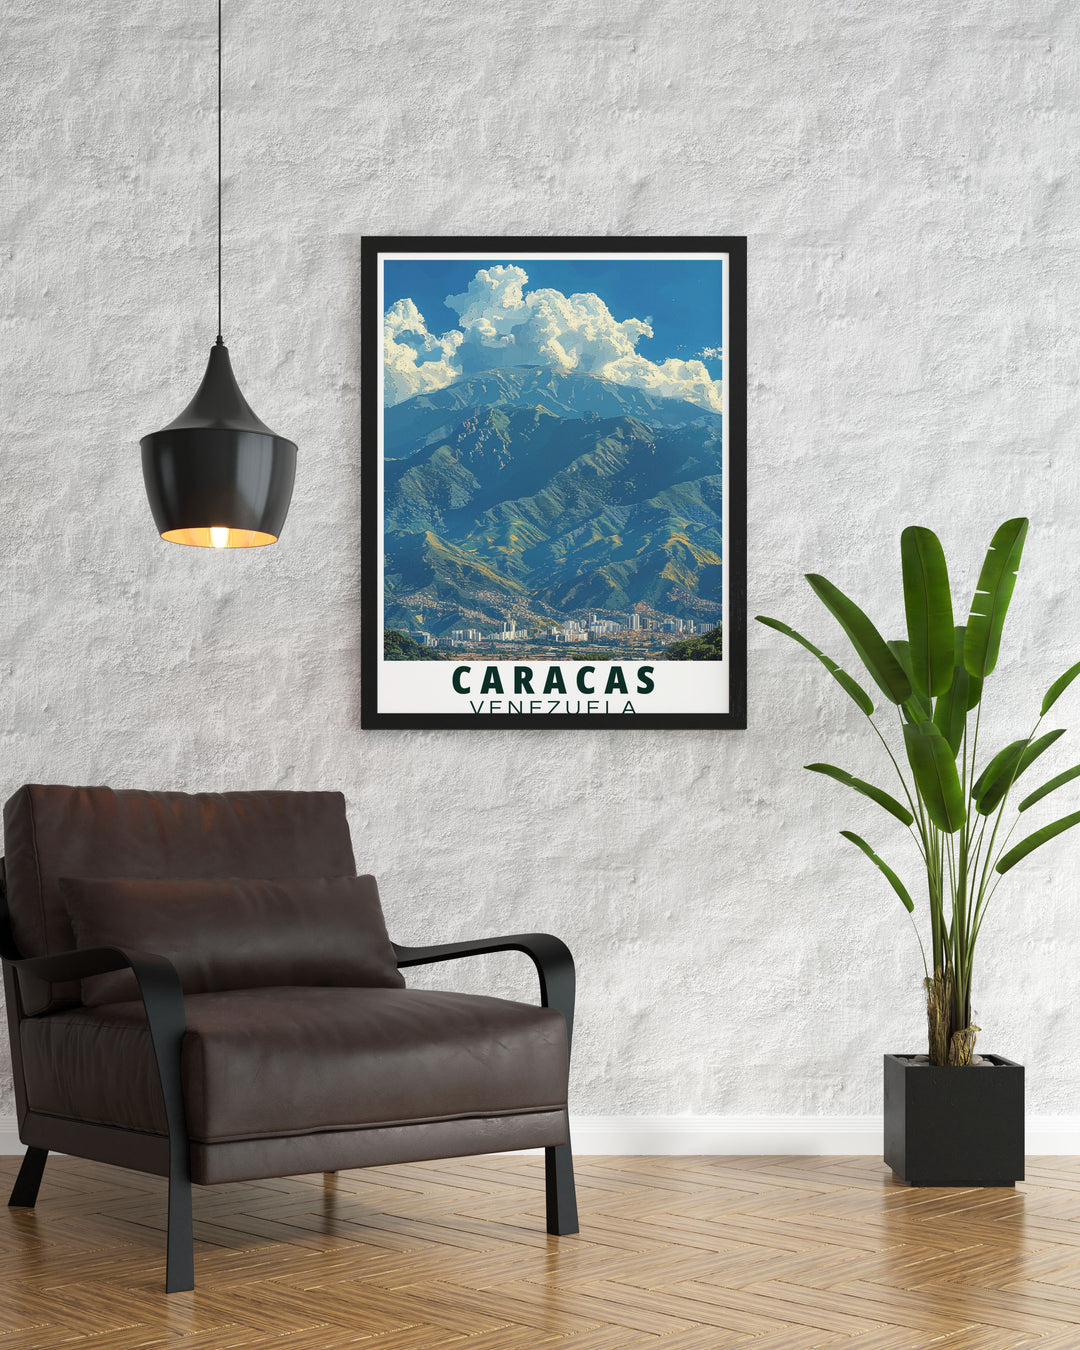 The captivating blend of rugged mountain landscapes and dynamic urban scenes in Caracas and Avila Mountain is beautifully illustrated in this poster, making it a stunning addition to any wall art collection celebrating Venezuela.